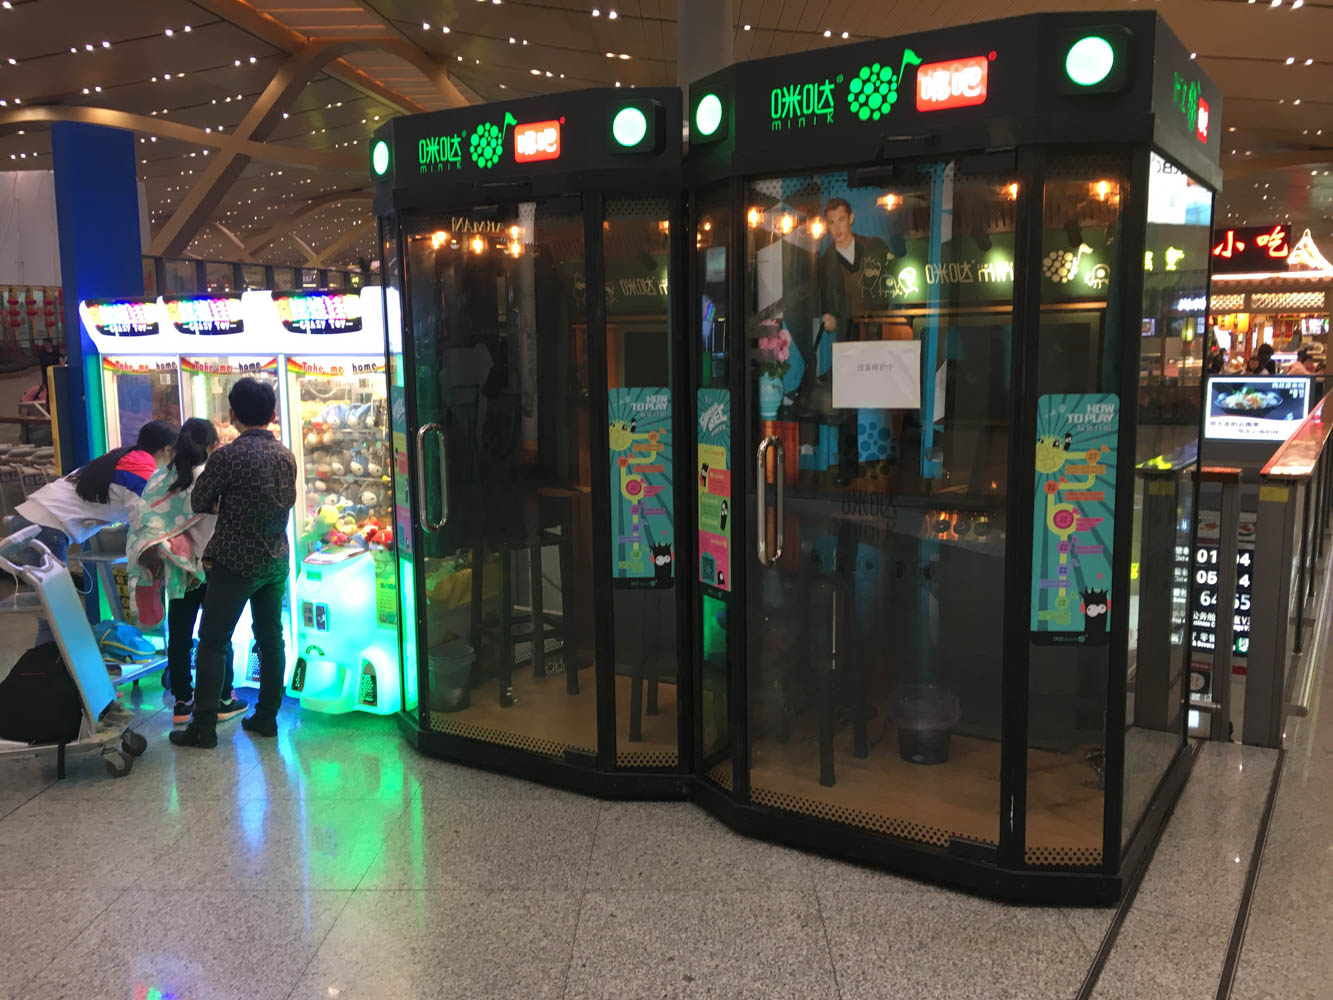 Get your karaoke fix at the airport